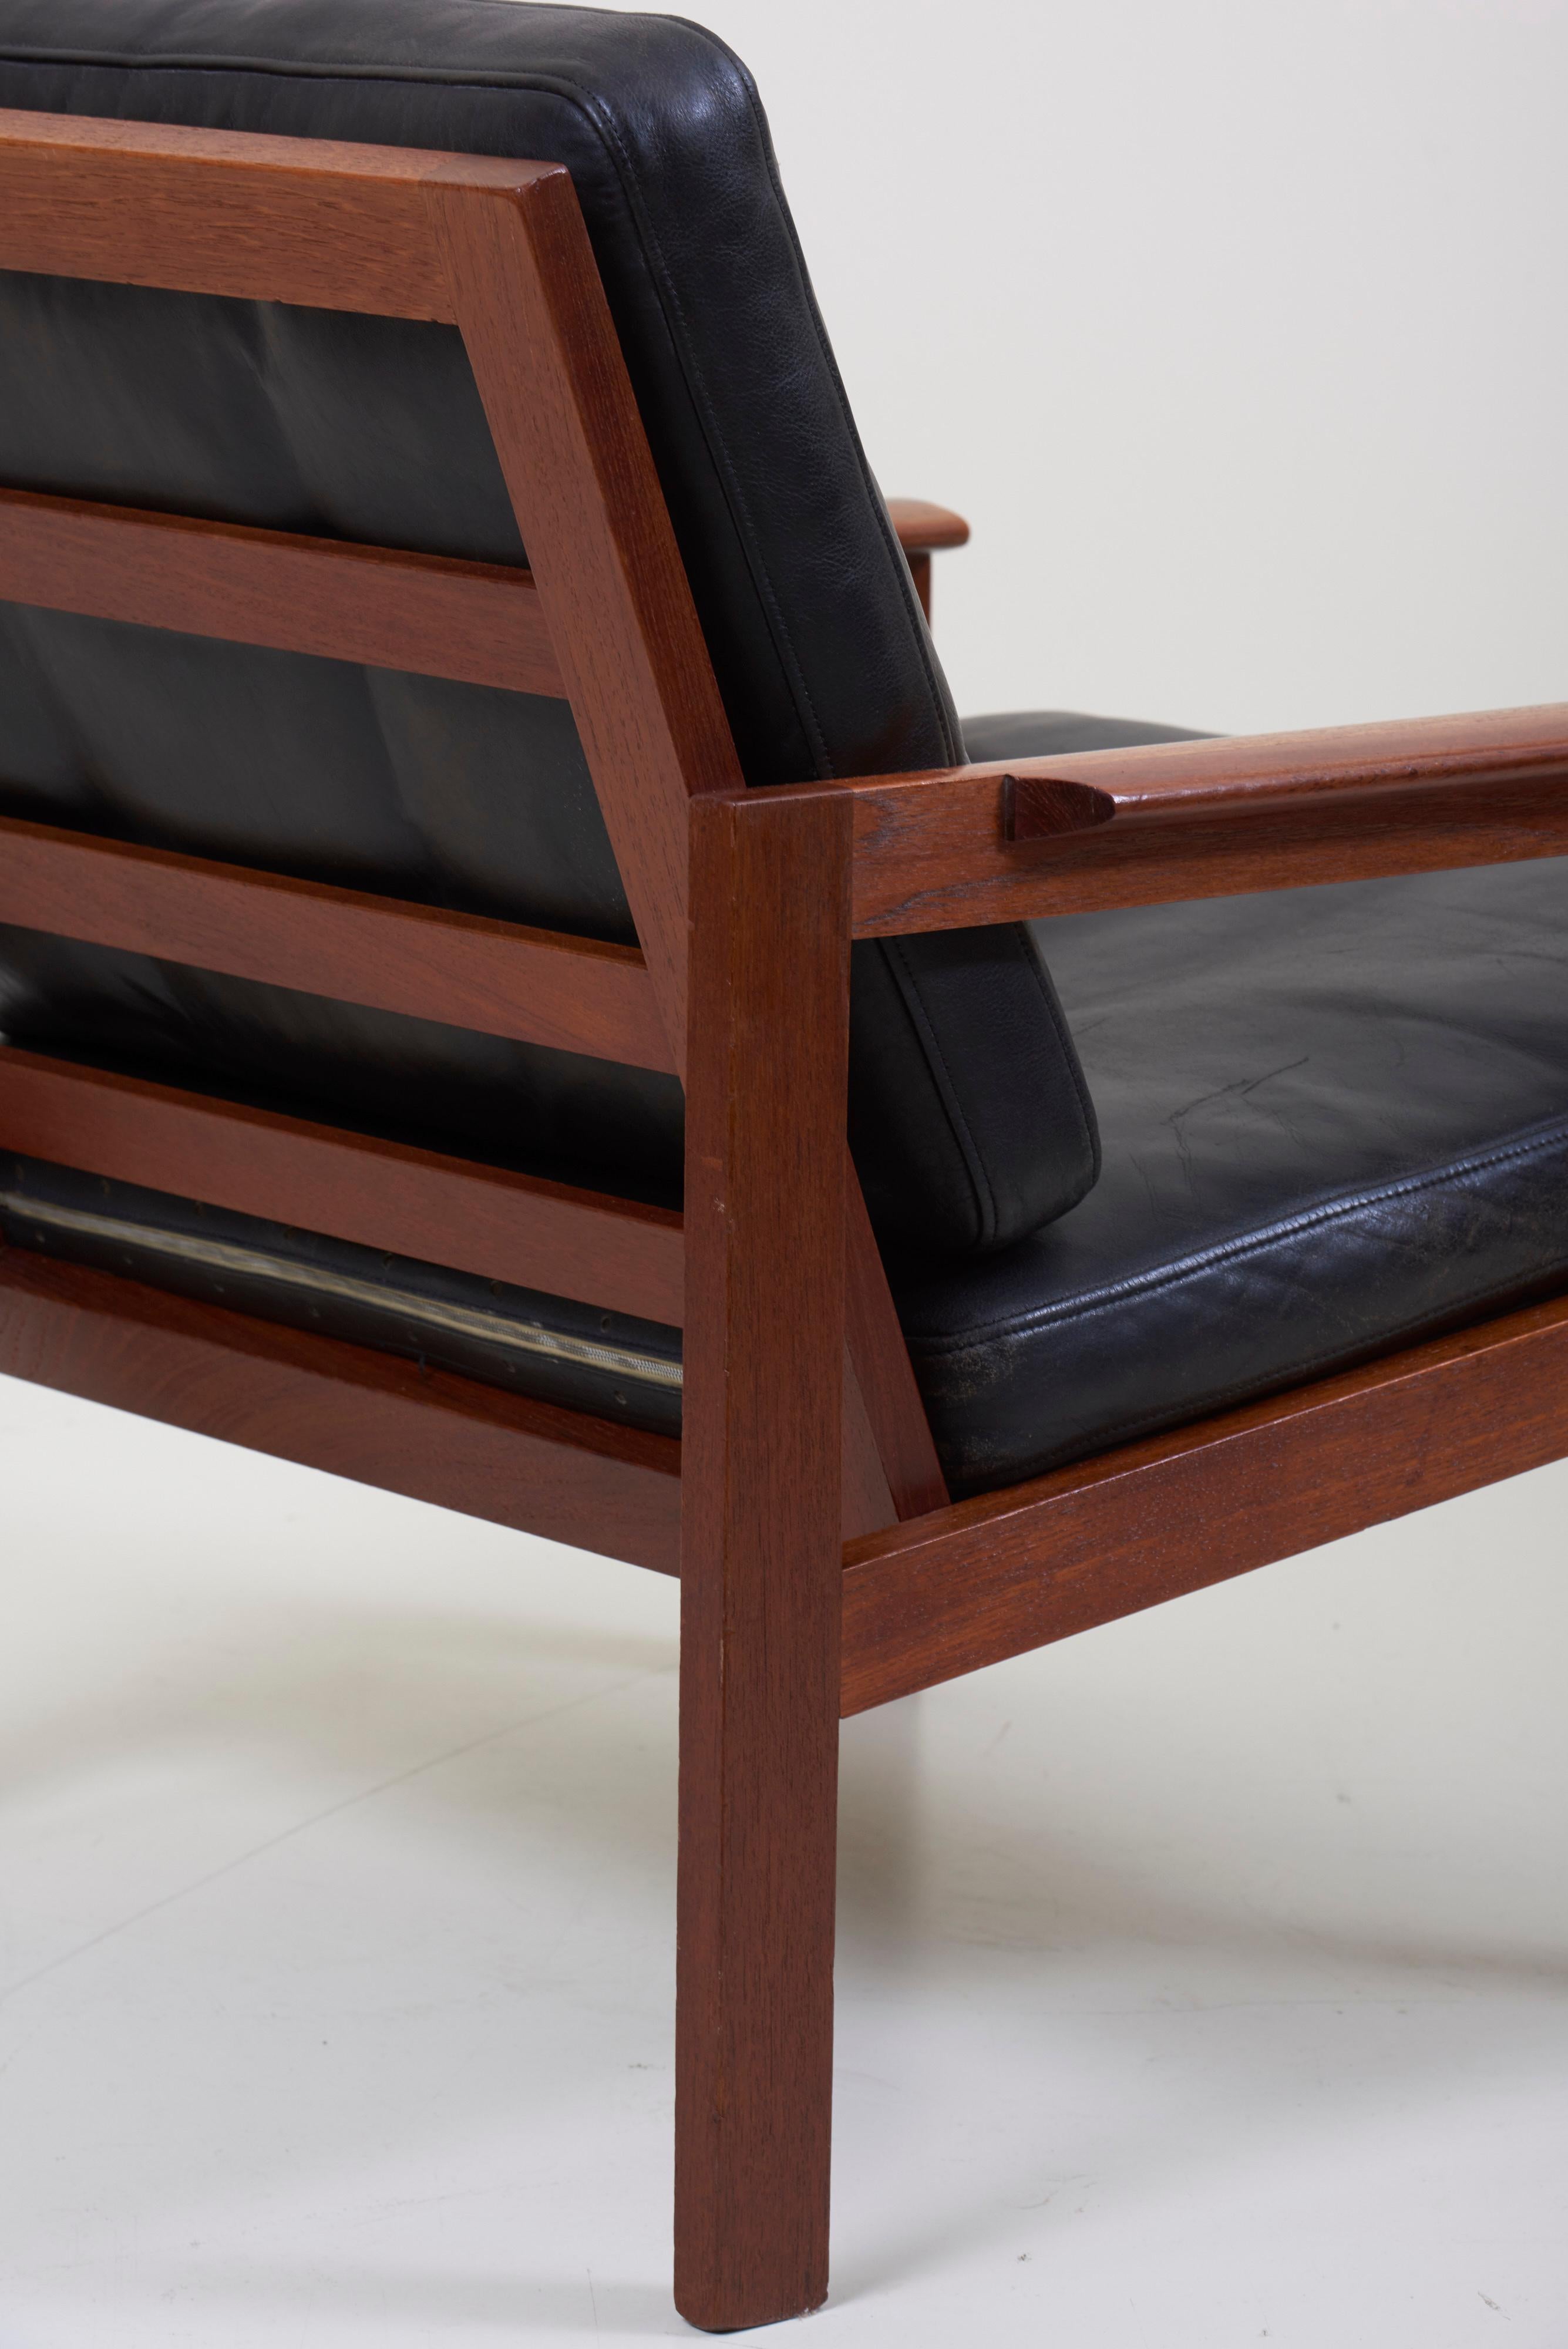 Pair of Lounge Chairs in Teak and Leather by Danish Architect Illum Wikkelsø 1